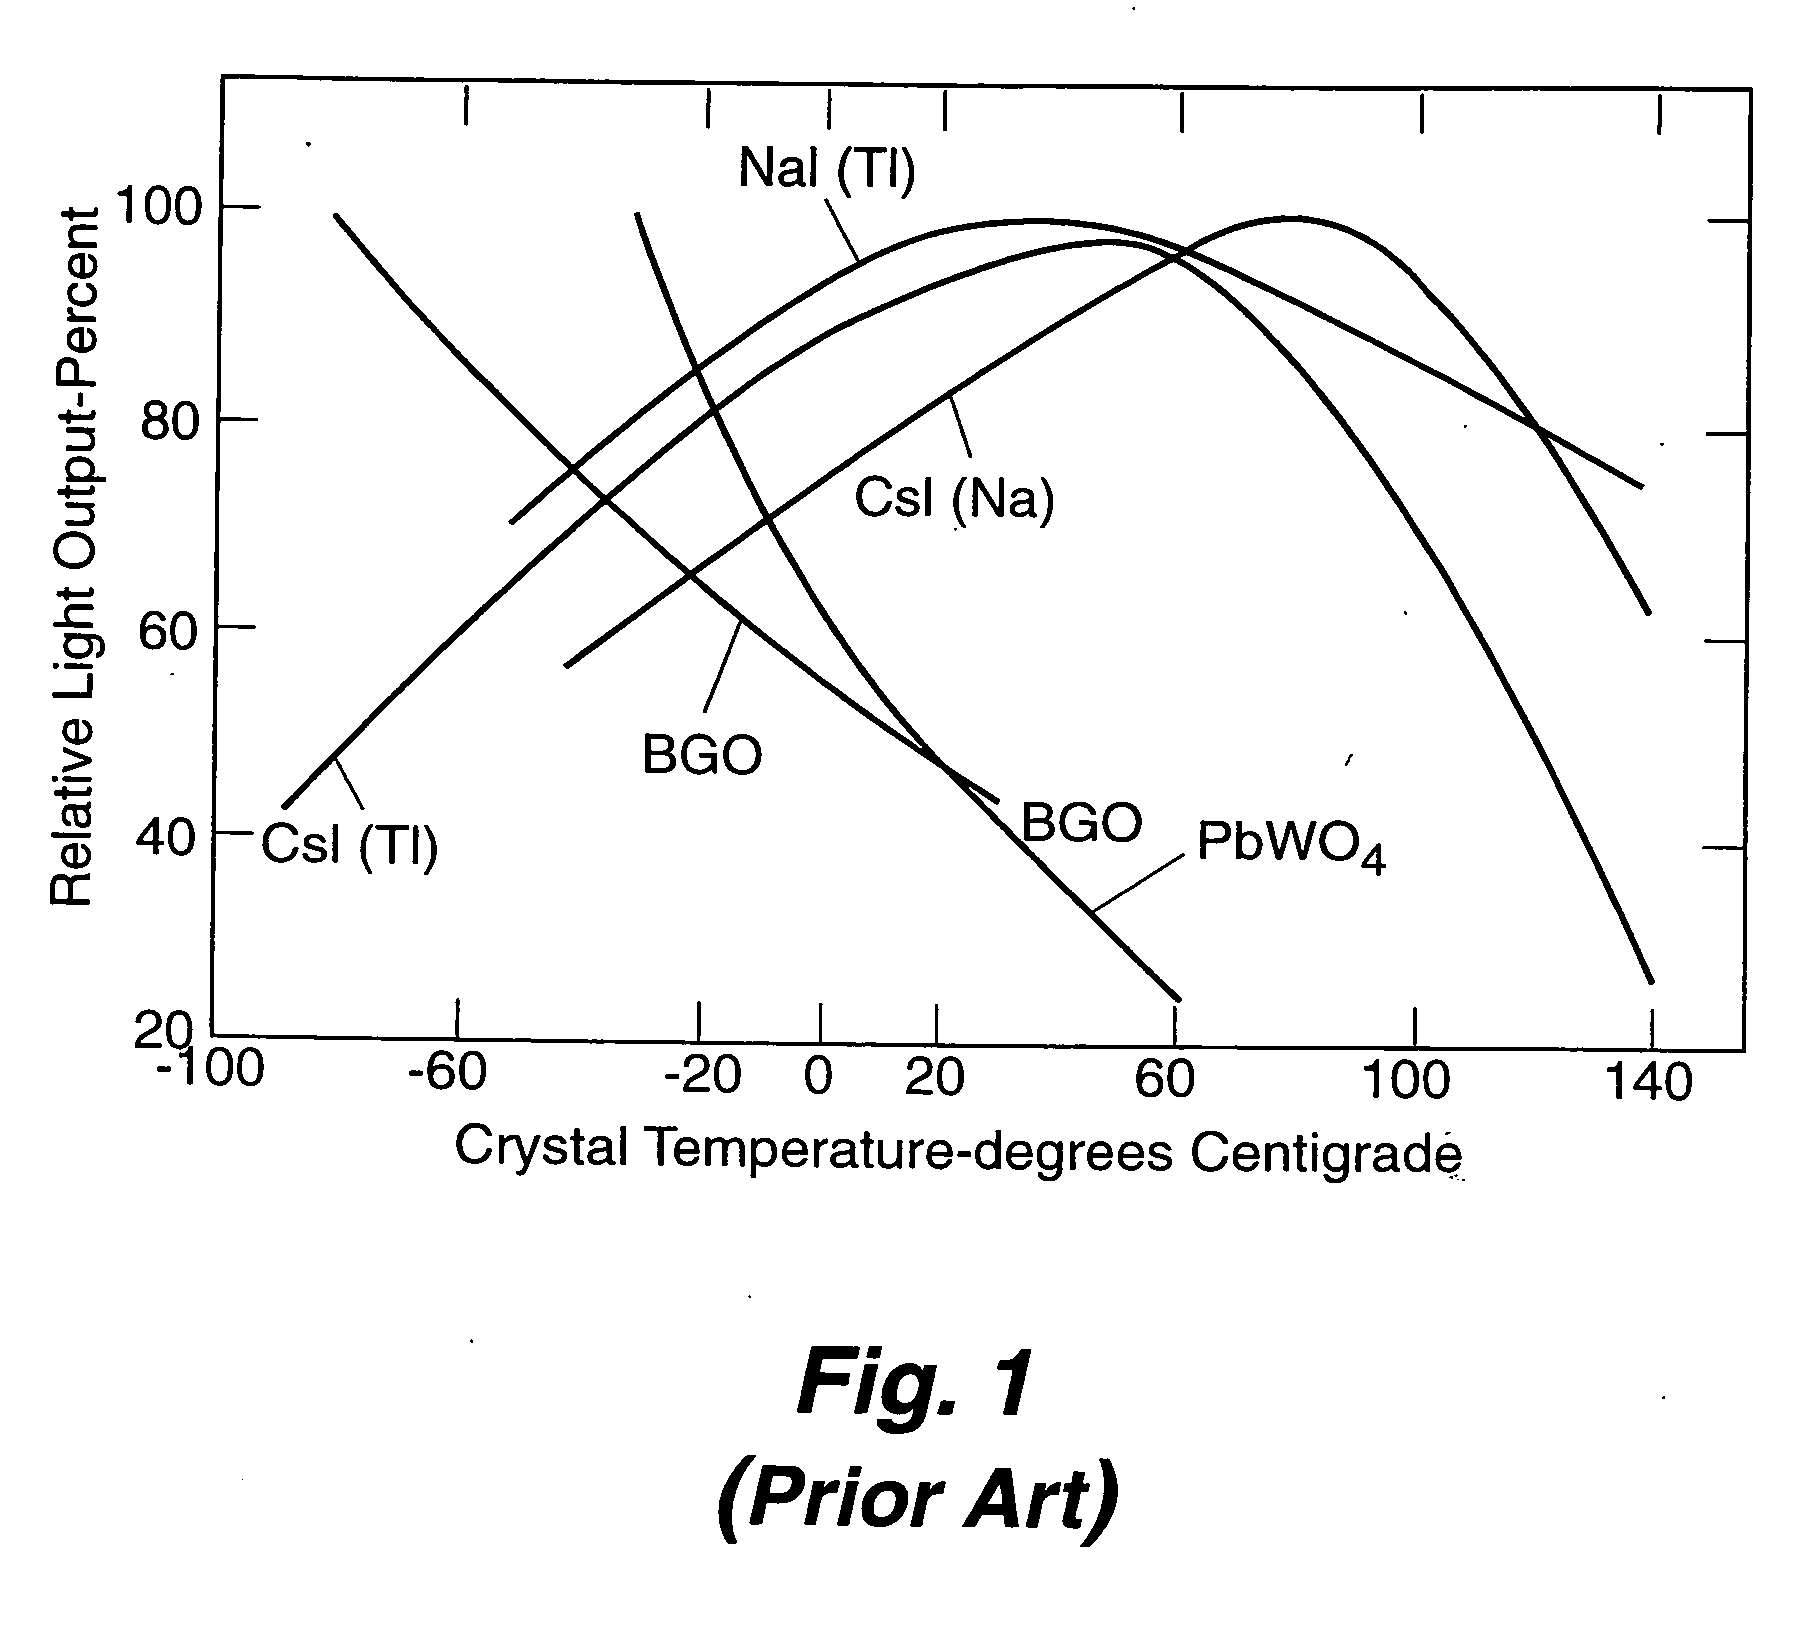 Apparatus and method for temperature correction and expanded count rate of inorganic scintillation detectors